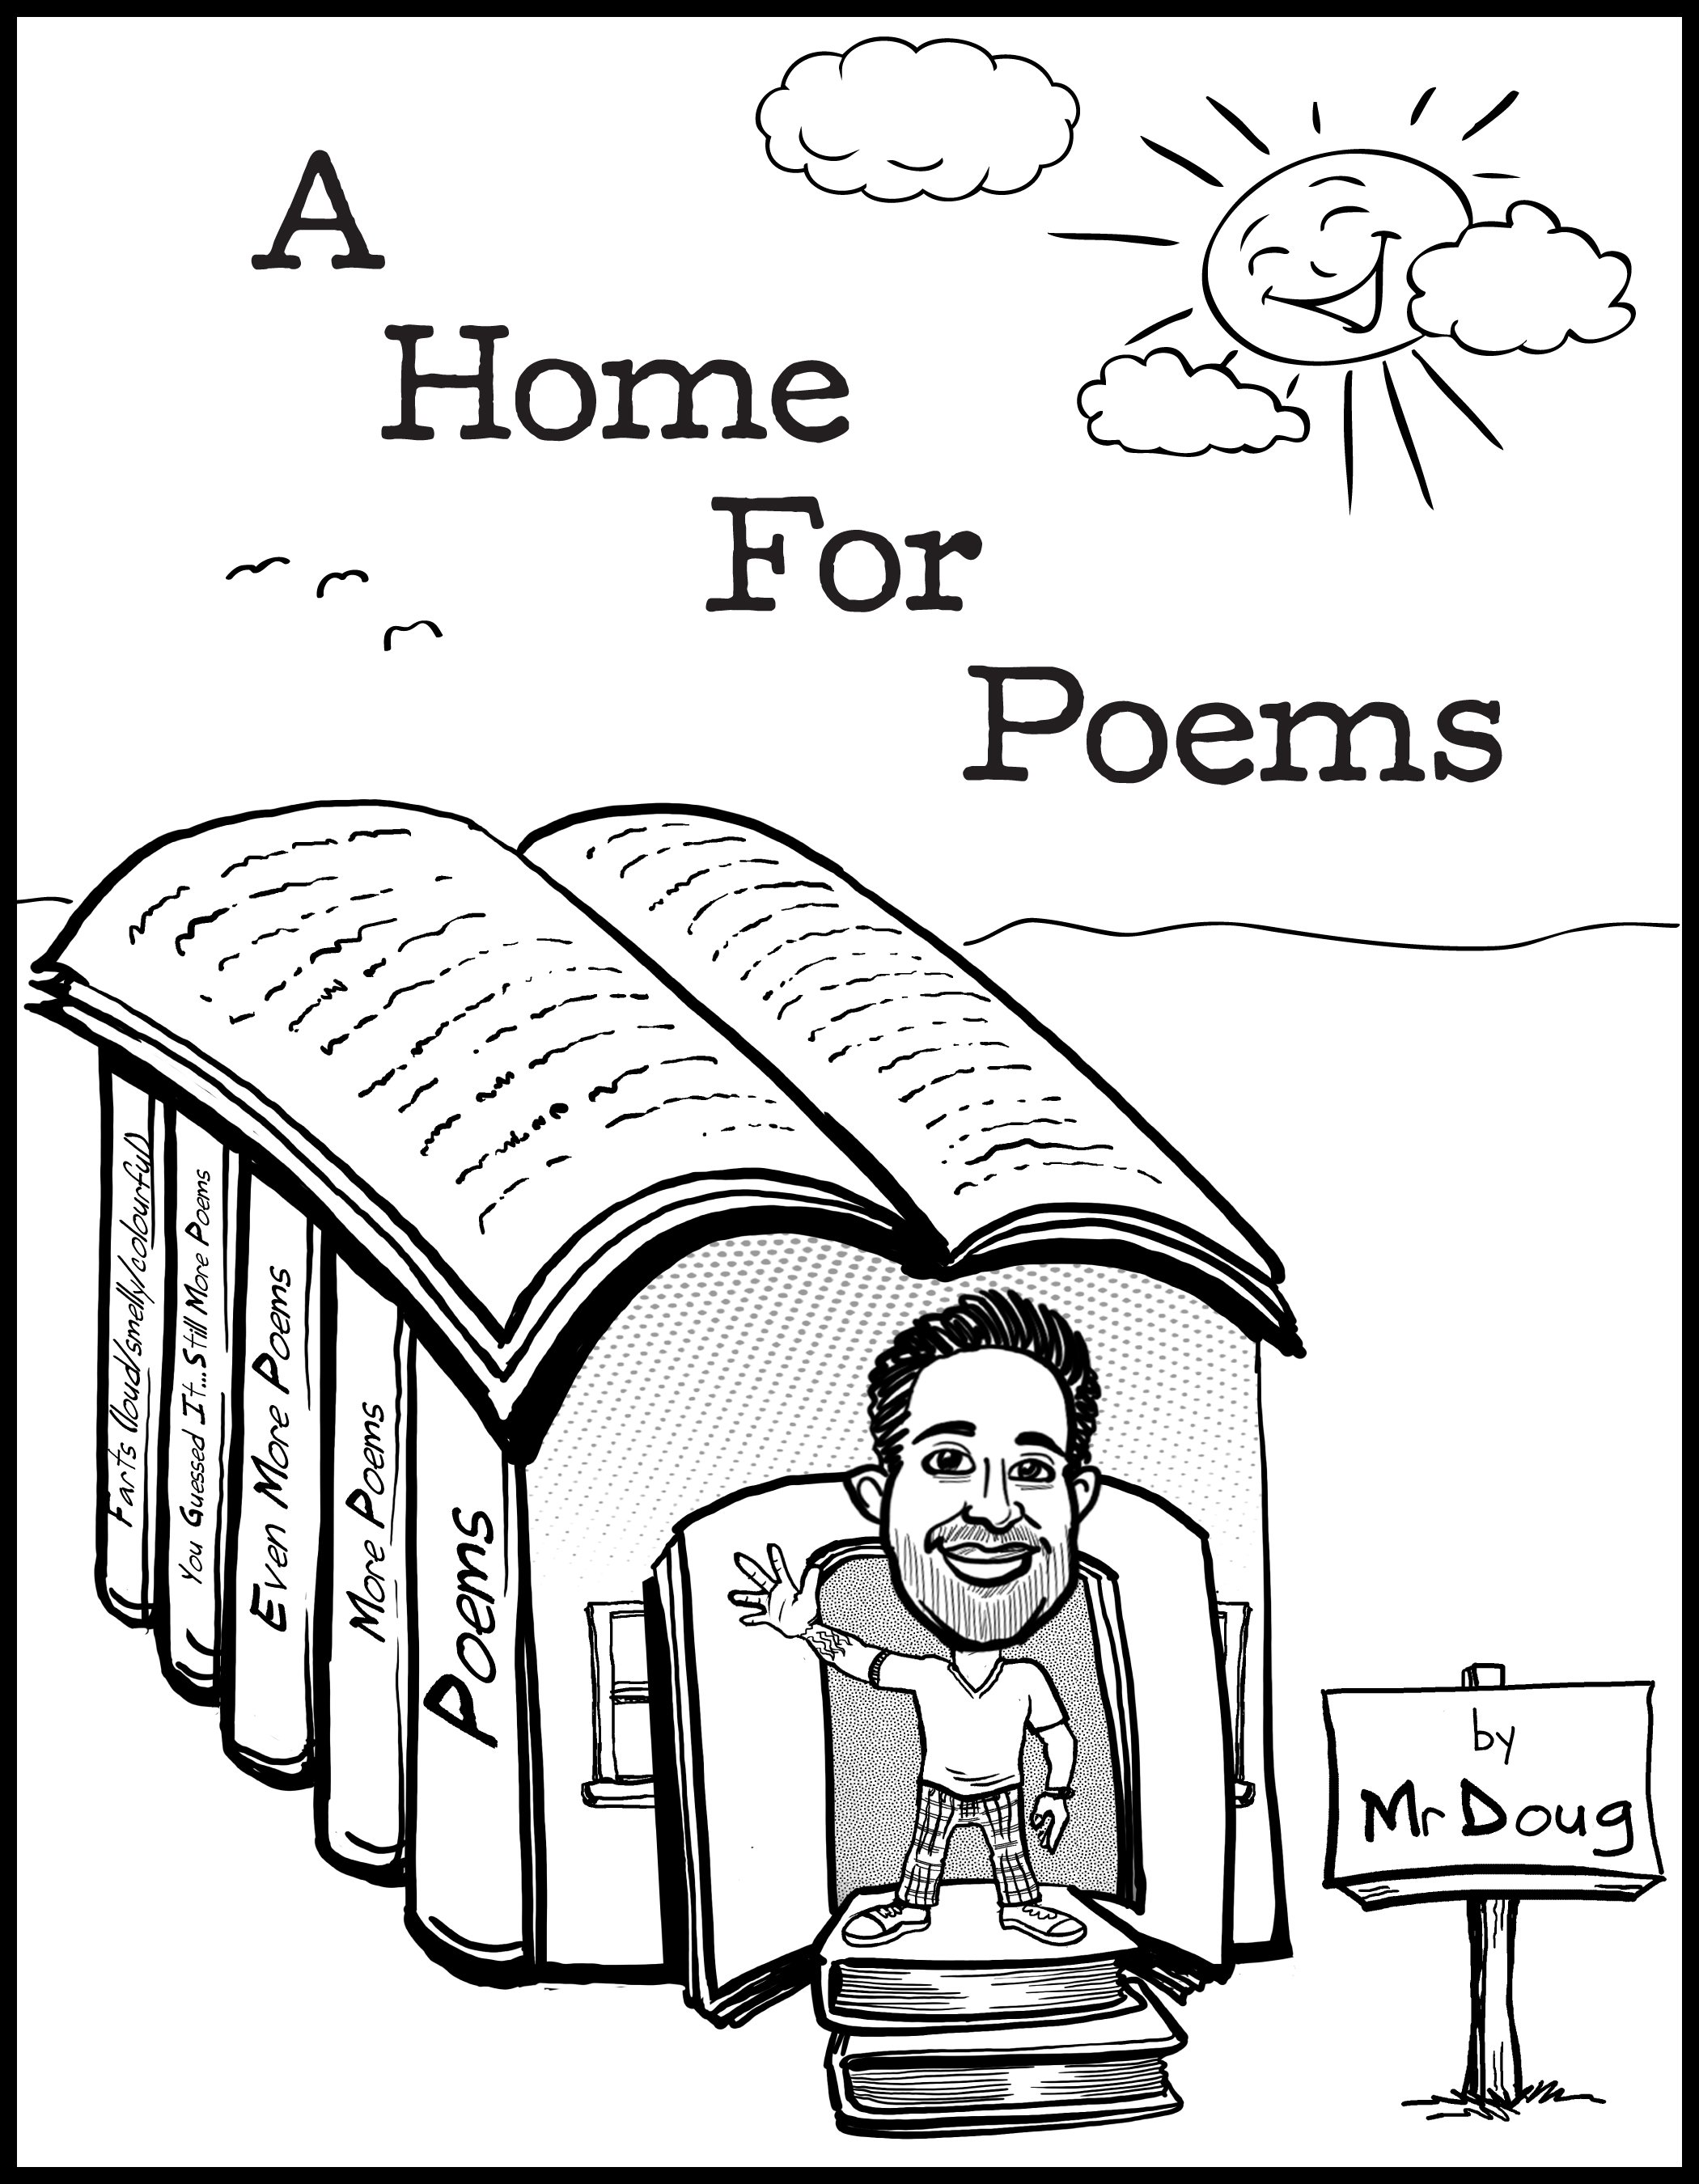 A Home For Poems_Cover.jpg